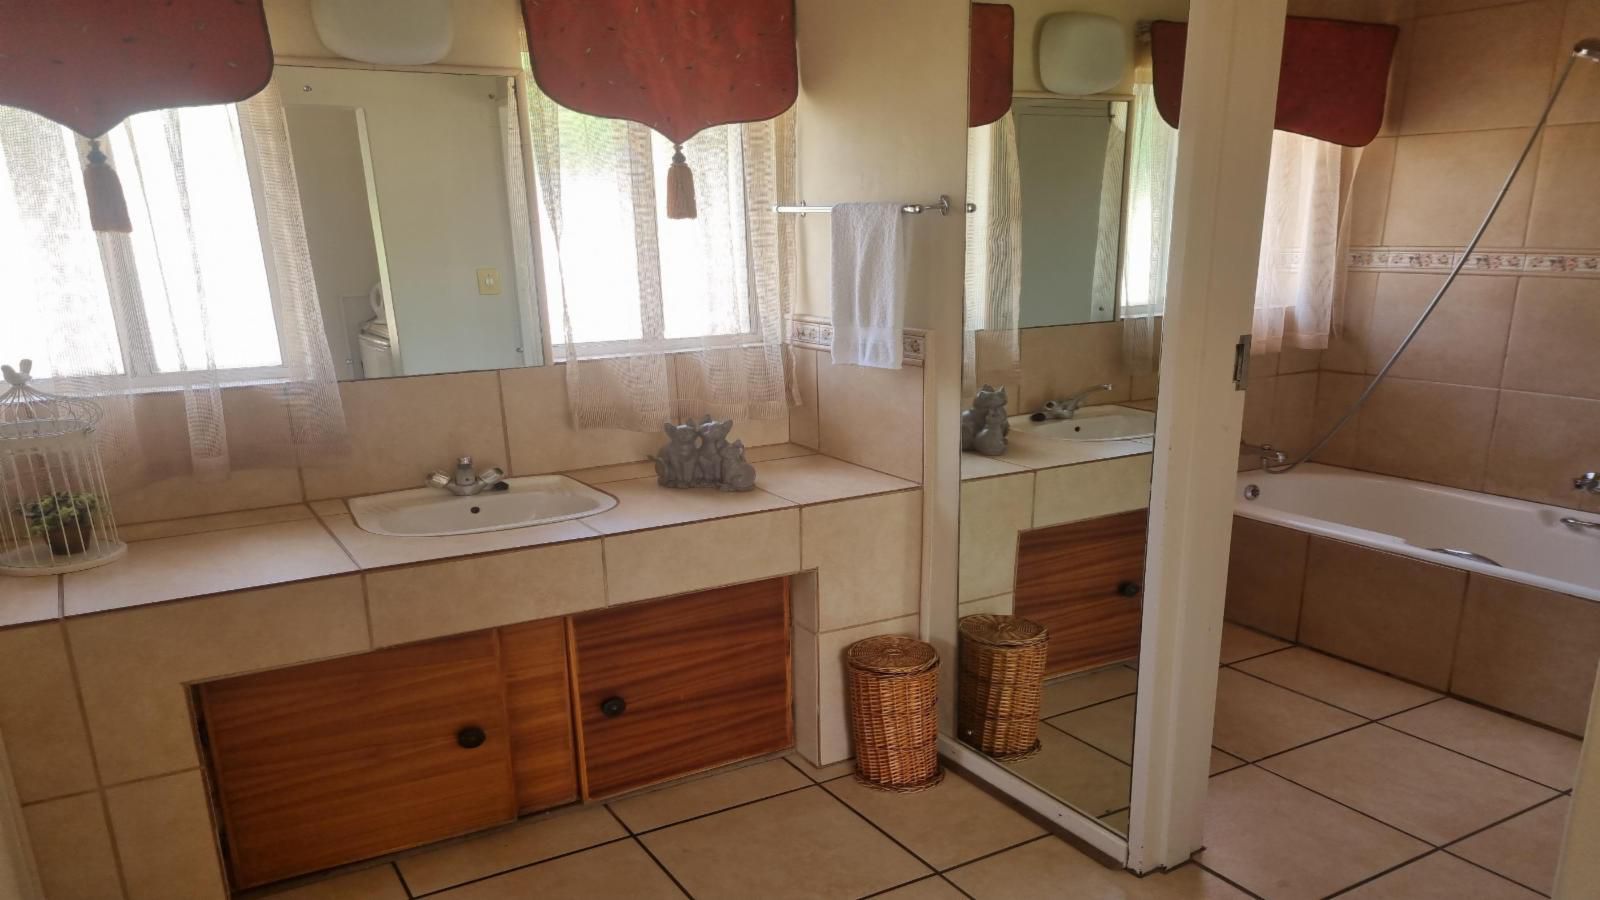 Frankfort Guest House Frankfort Free State South Africa Bathroom